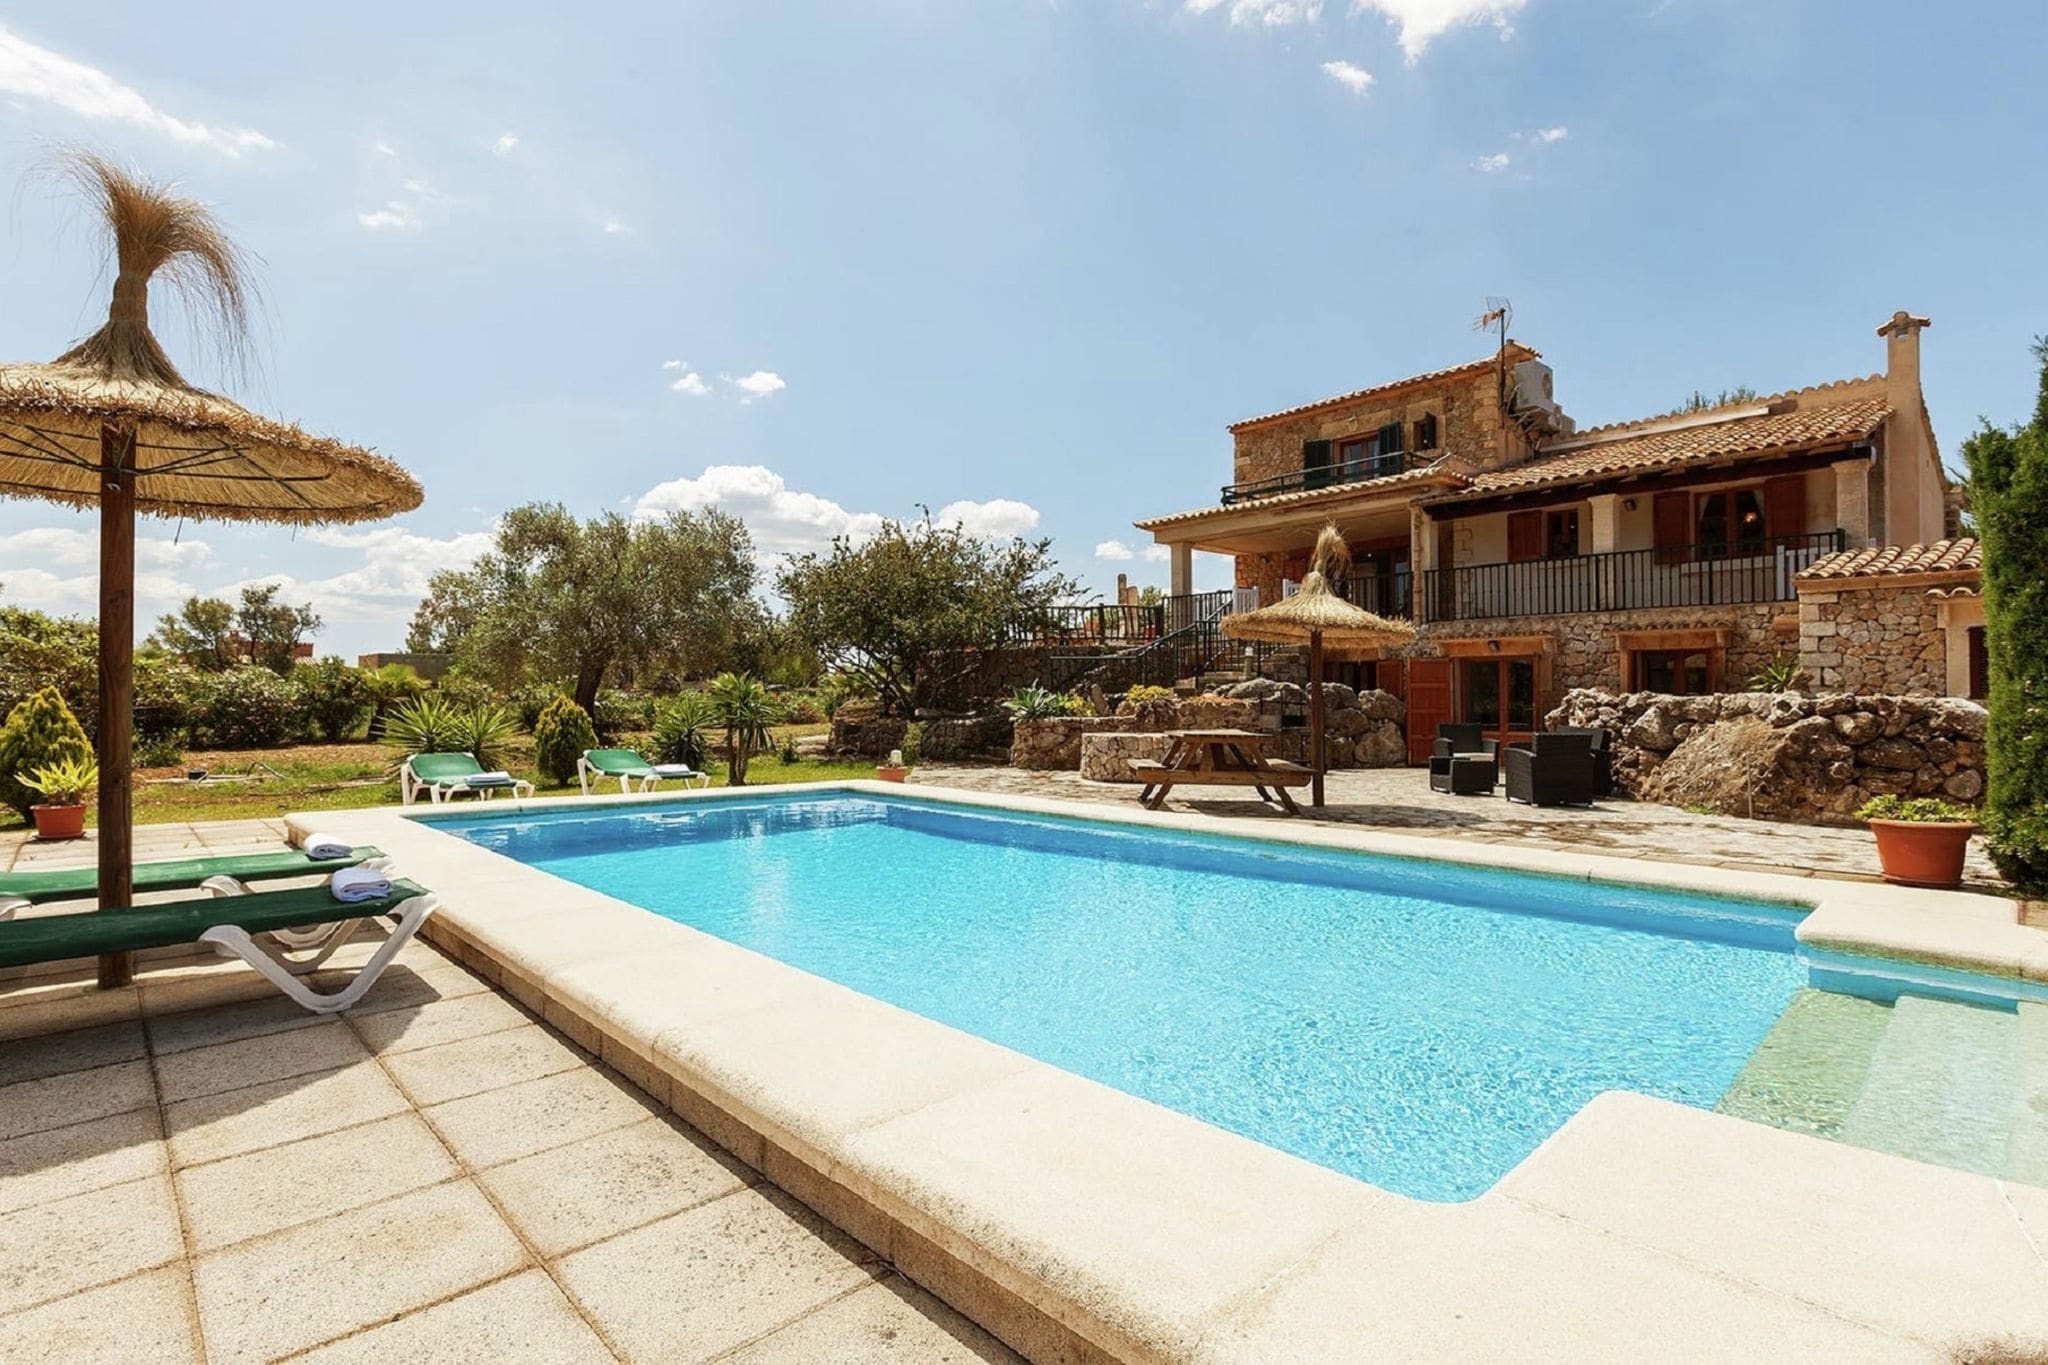 Large and comfortable cottage with private pool located near the sea